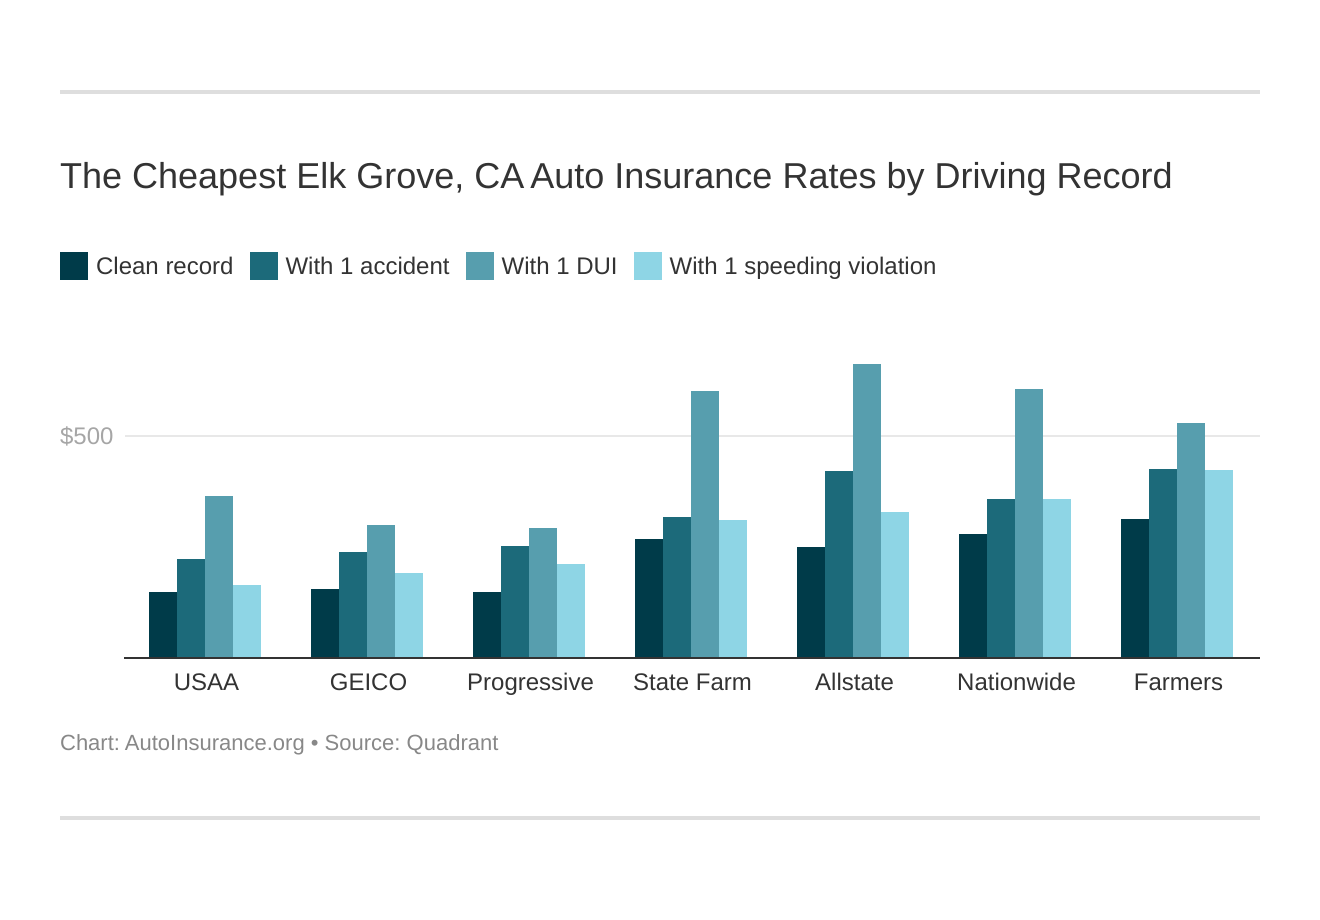 The Cheapest Elk Grove, CA Auto Insurance Rates by Driving Record